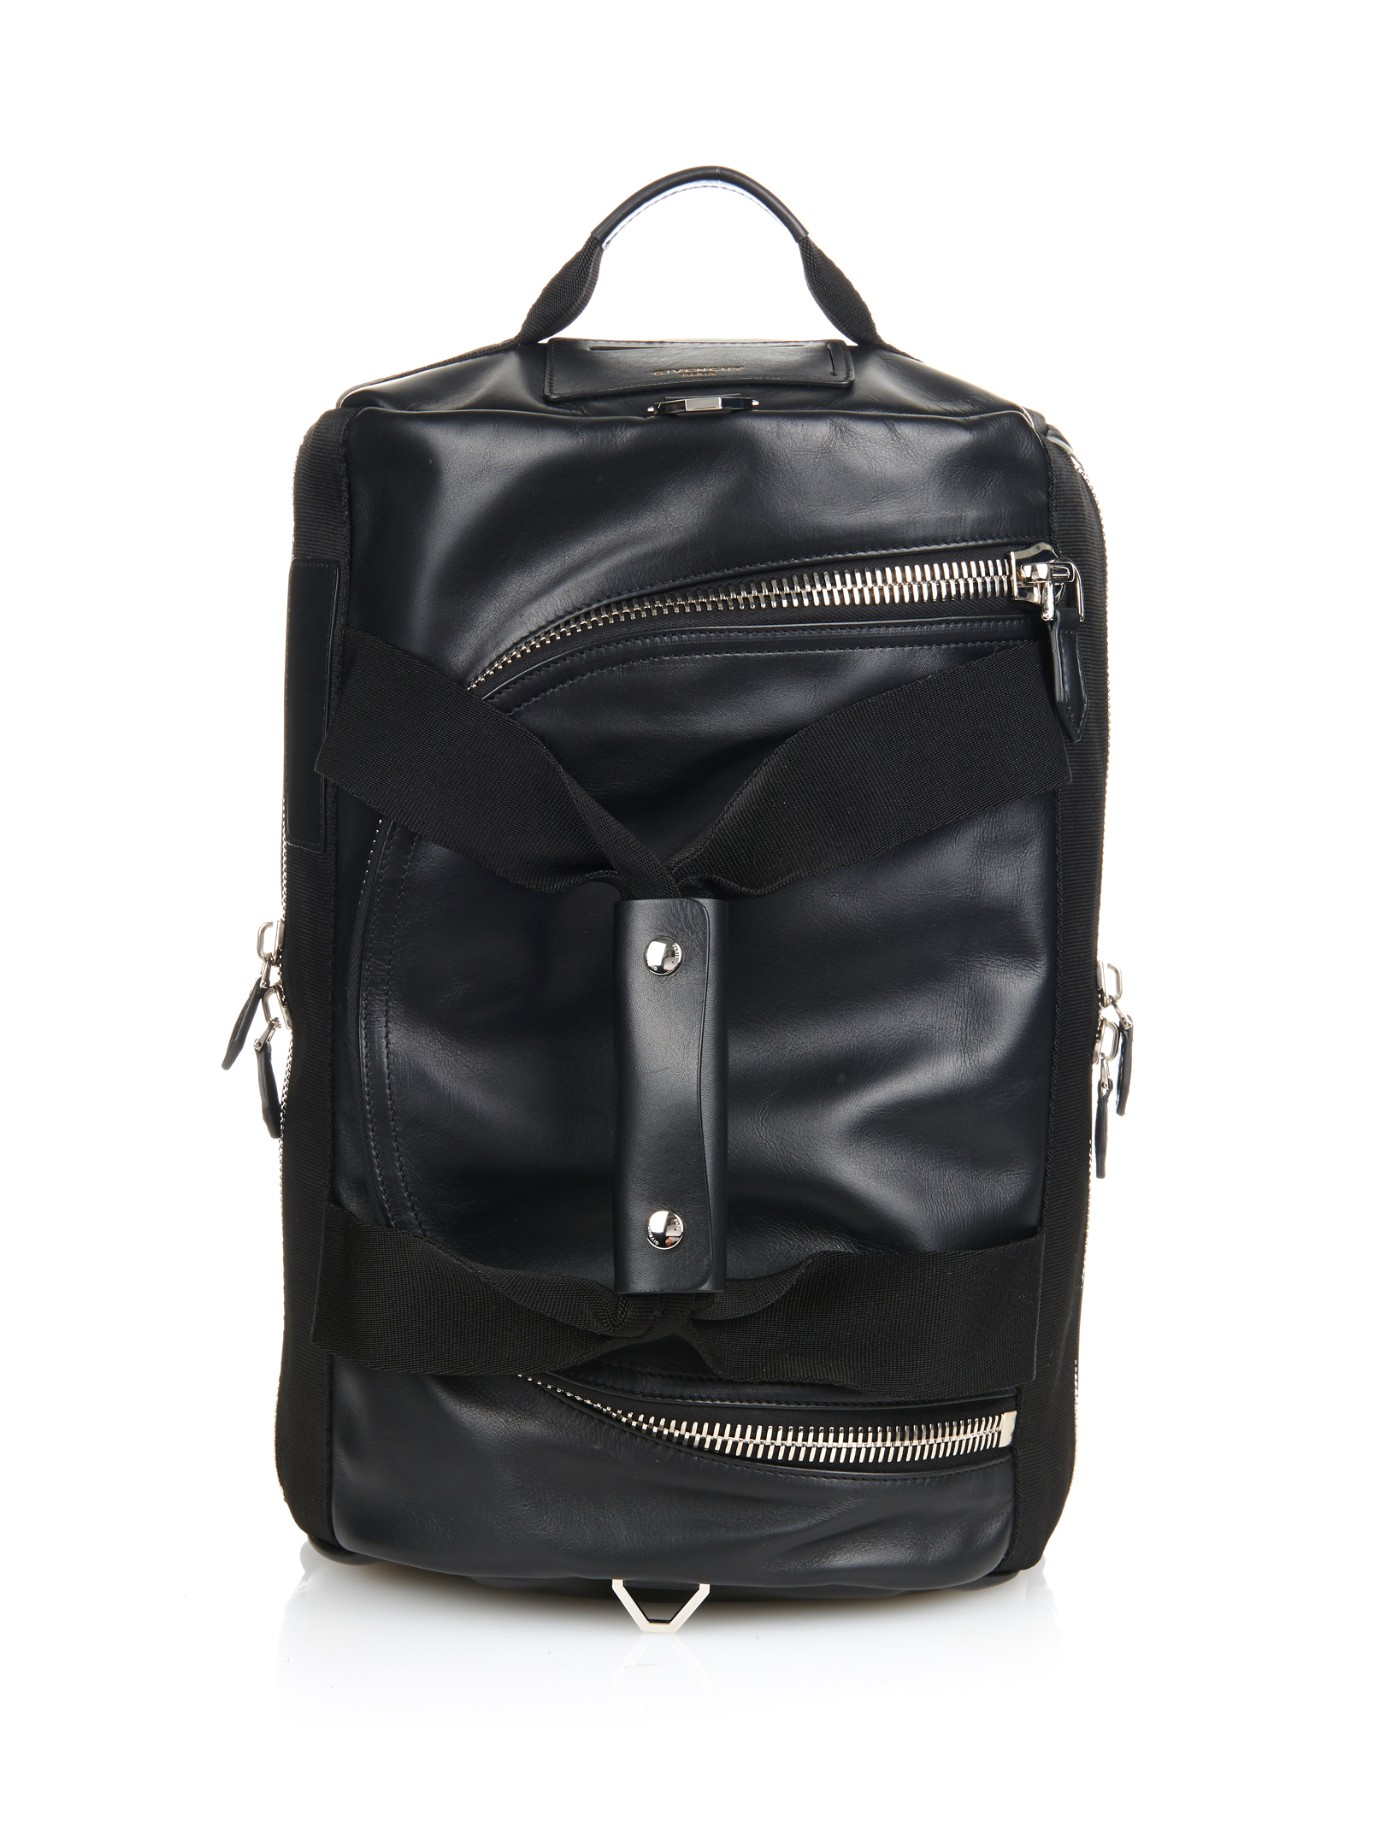 Lyst - Givenchy Hold-All Leather Backpack in Black for Men